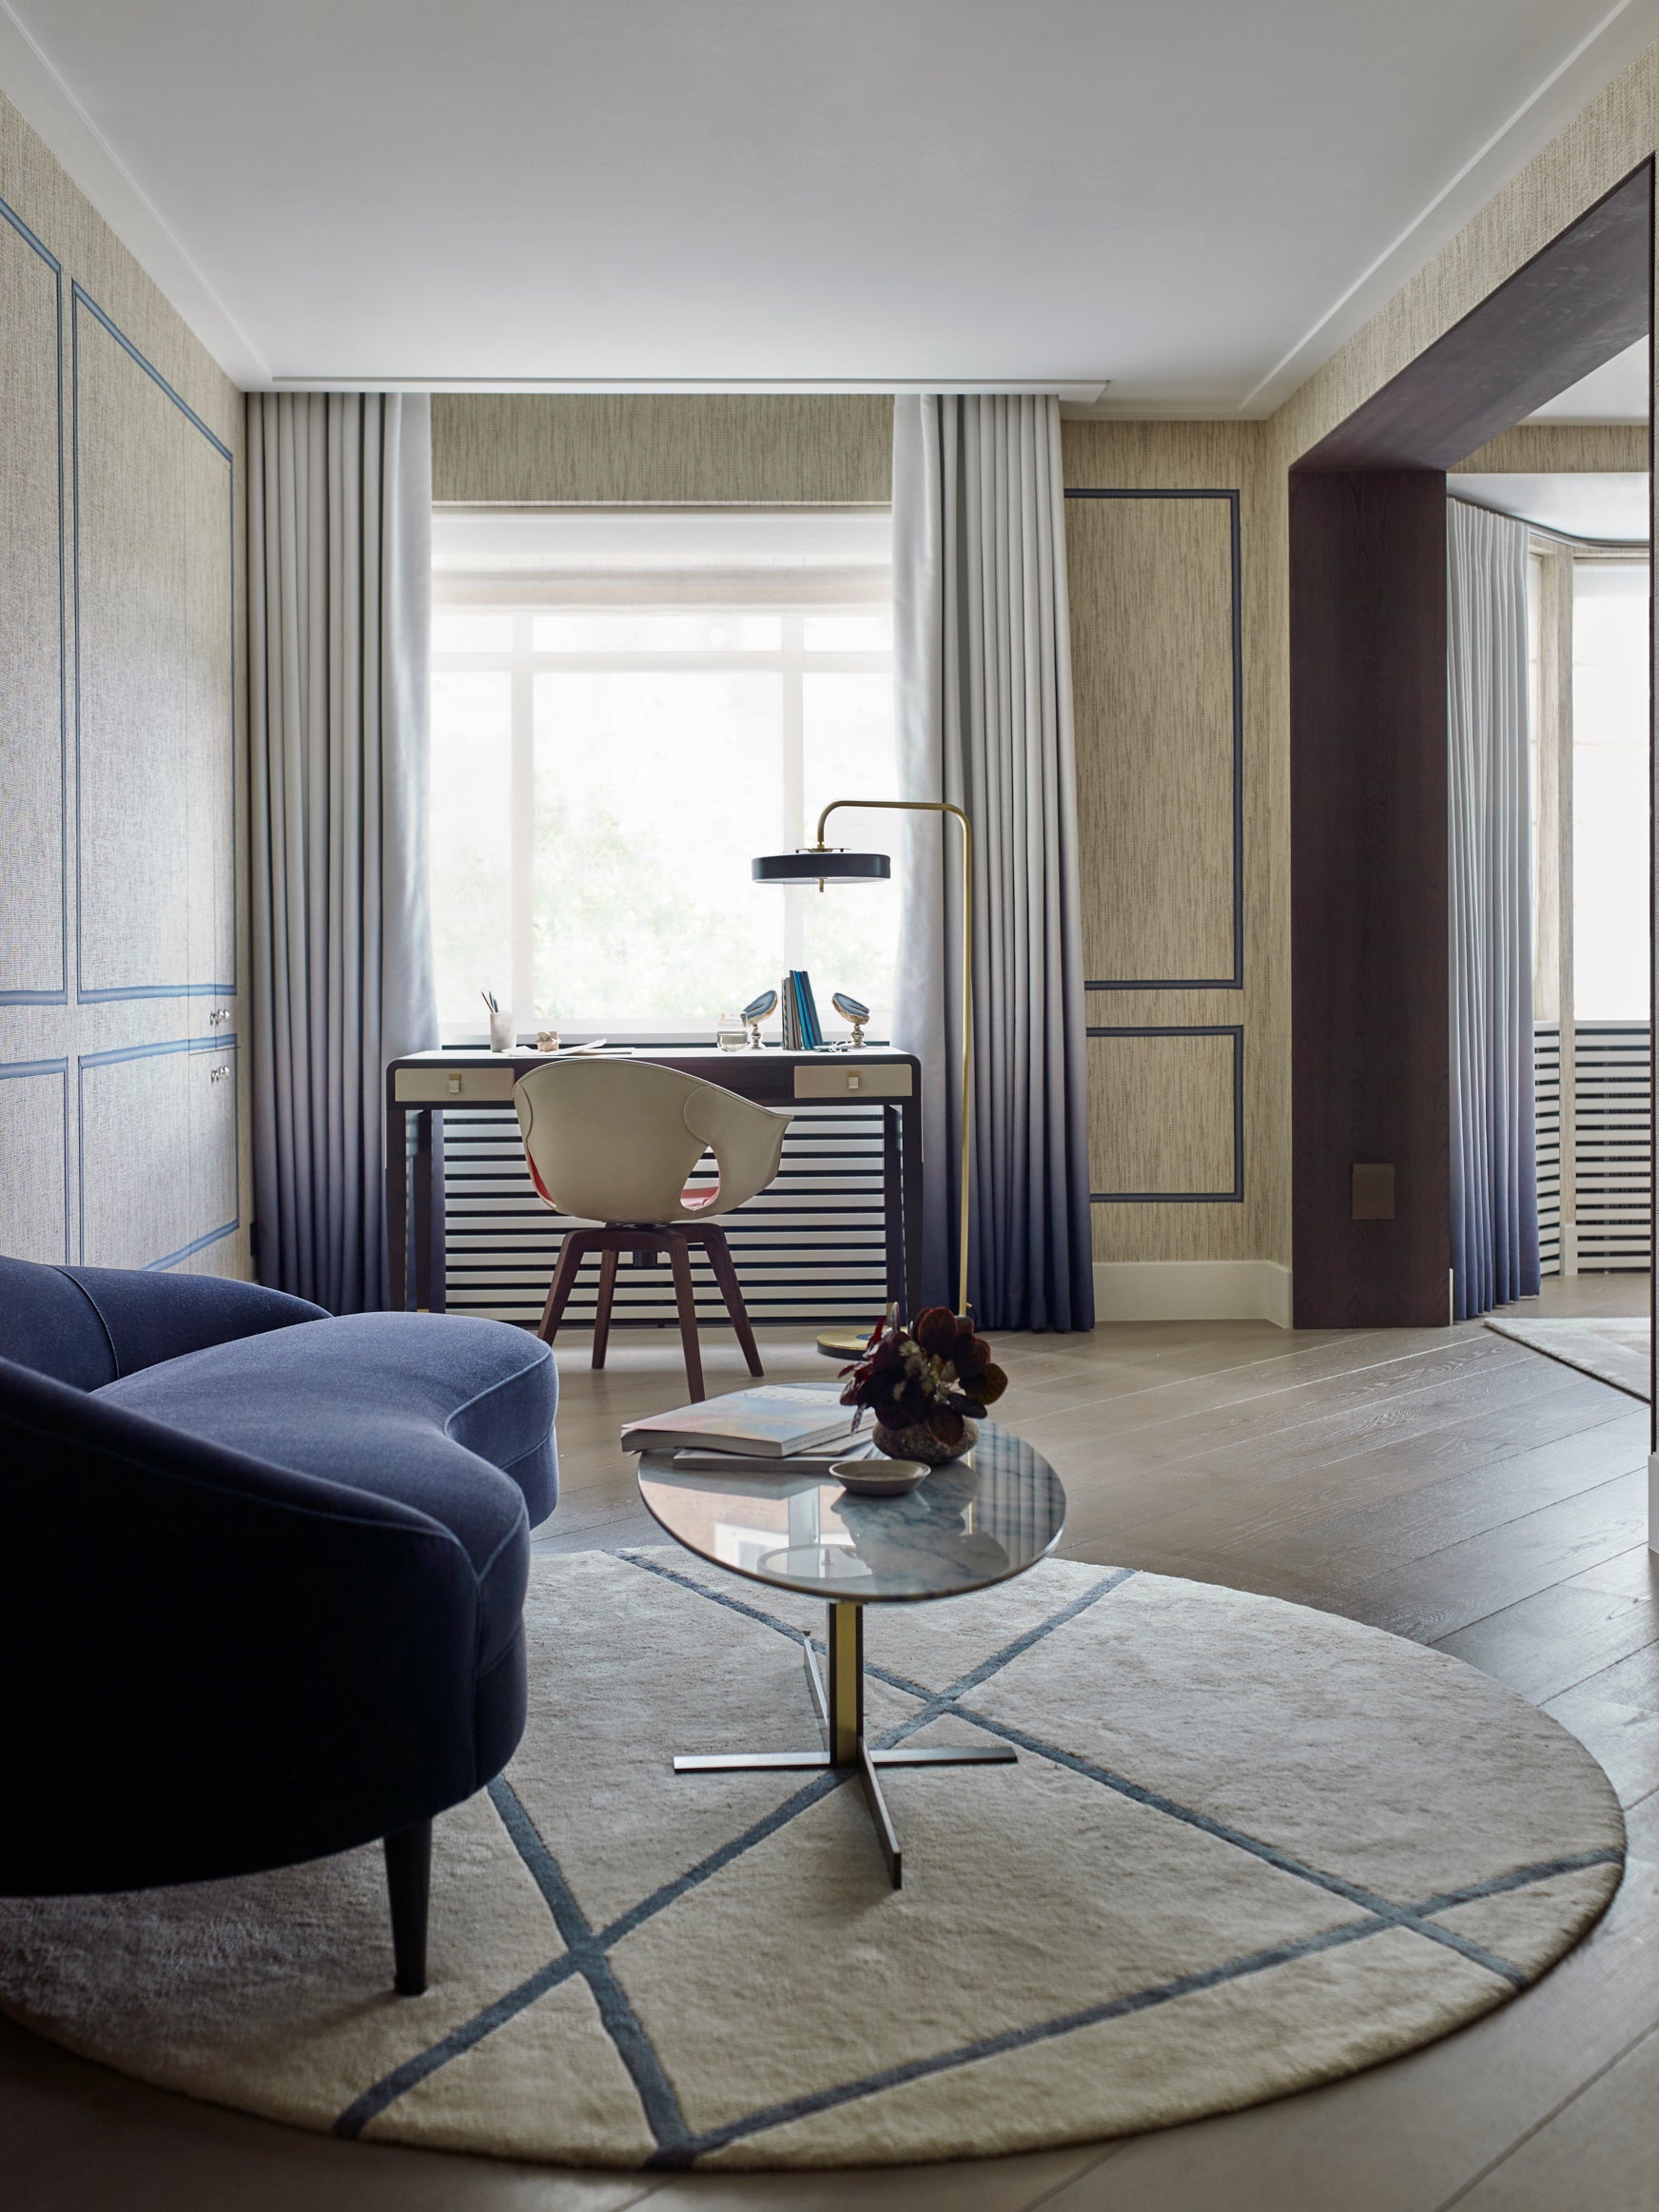 The Mayfair Project by Gunter &amp; Co demonstrates the way a change in the direction of flooring can goad more light into darker spaces (Gunter &amp; Co)